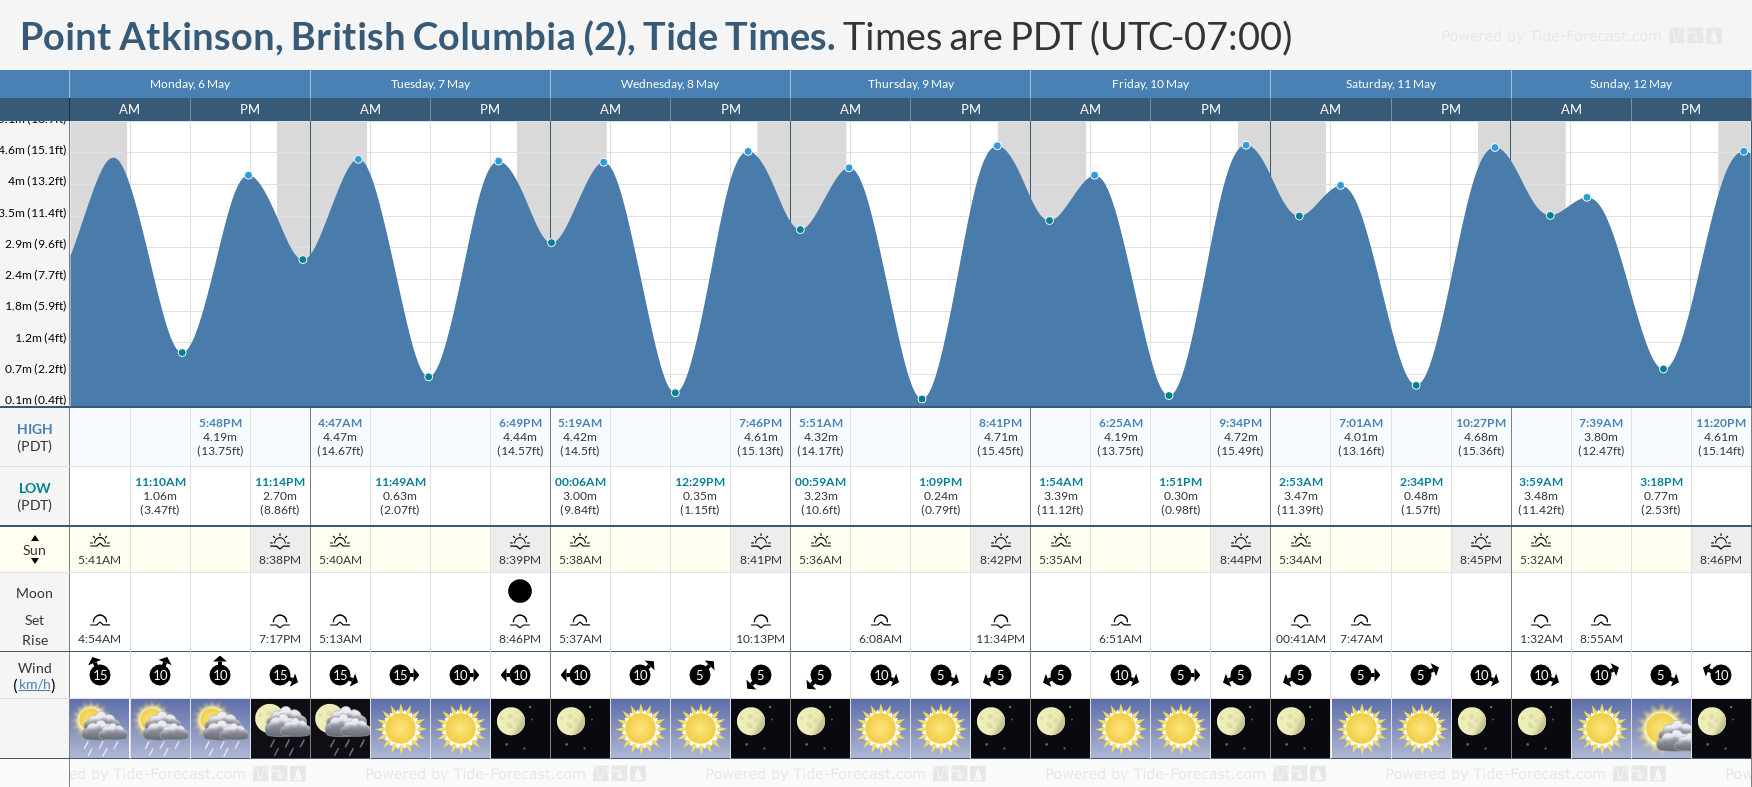 Point Atkinson, British Columbia (2) Tide Chart including high and low tide tide times for the next 7 days